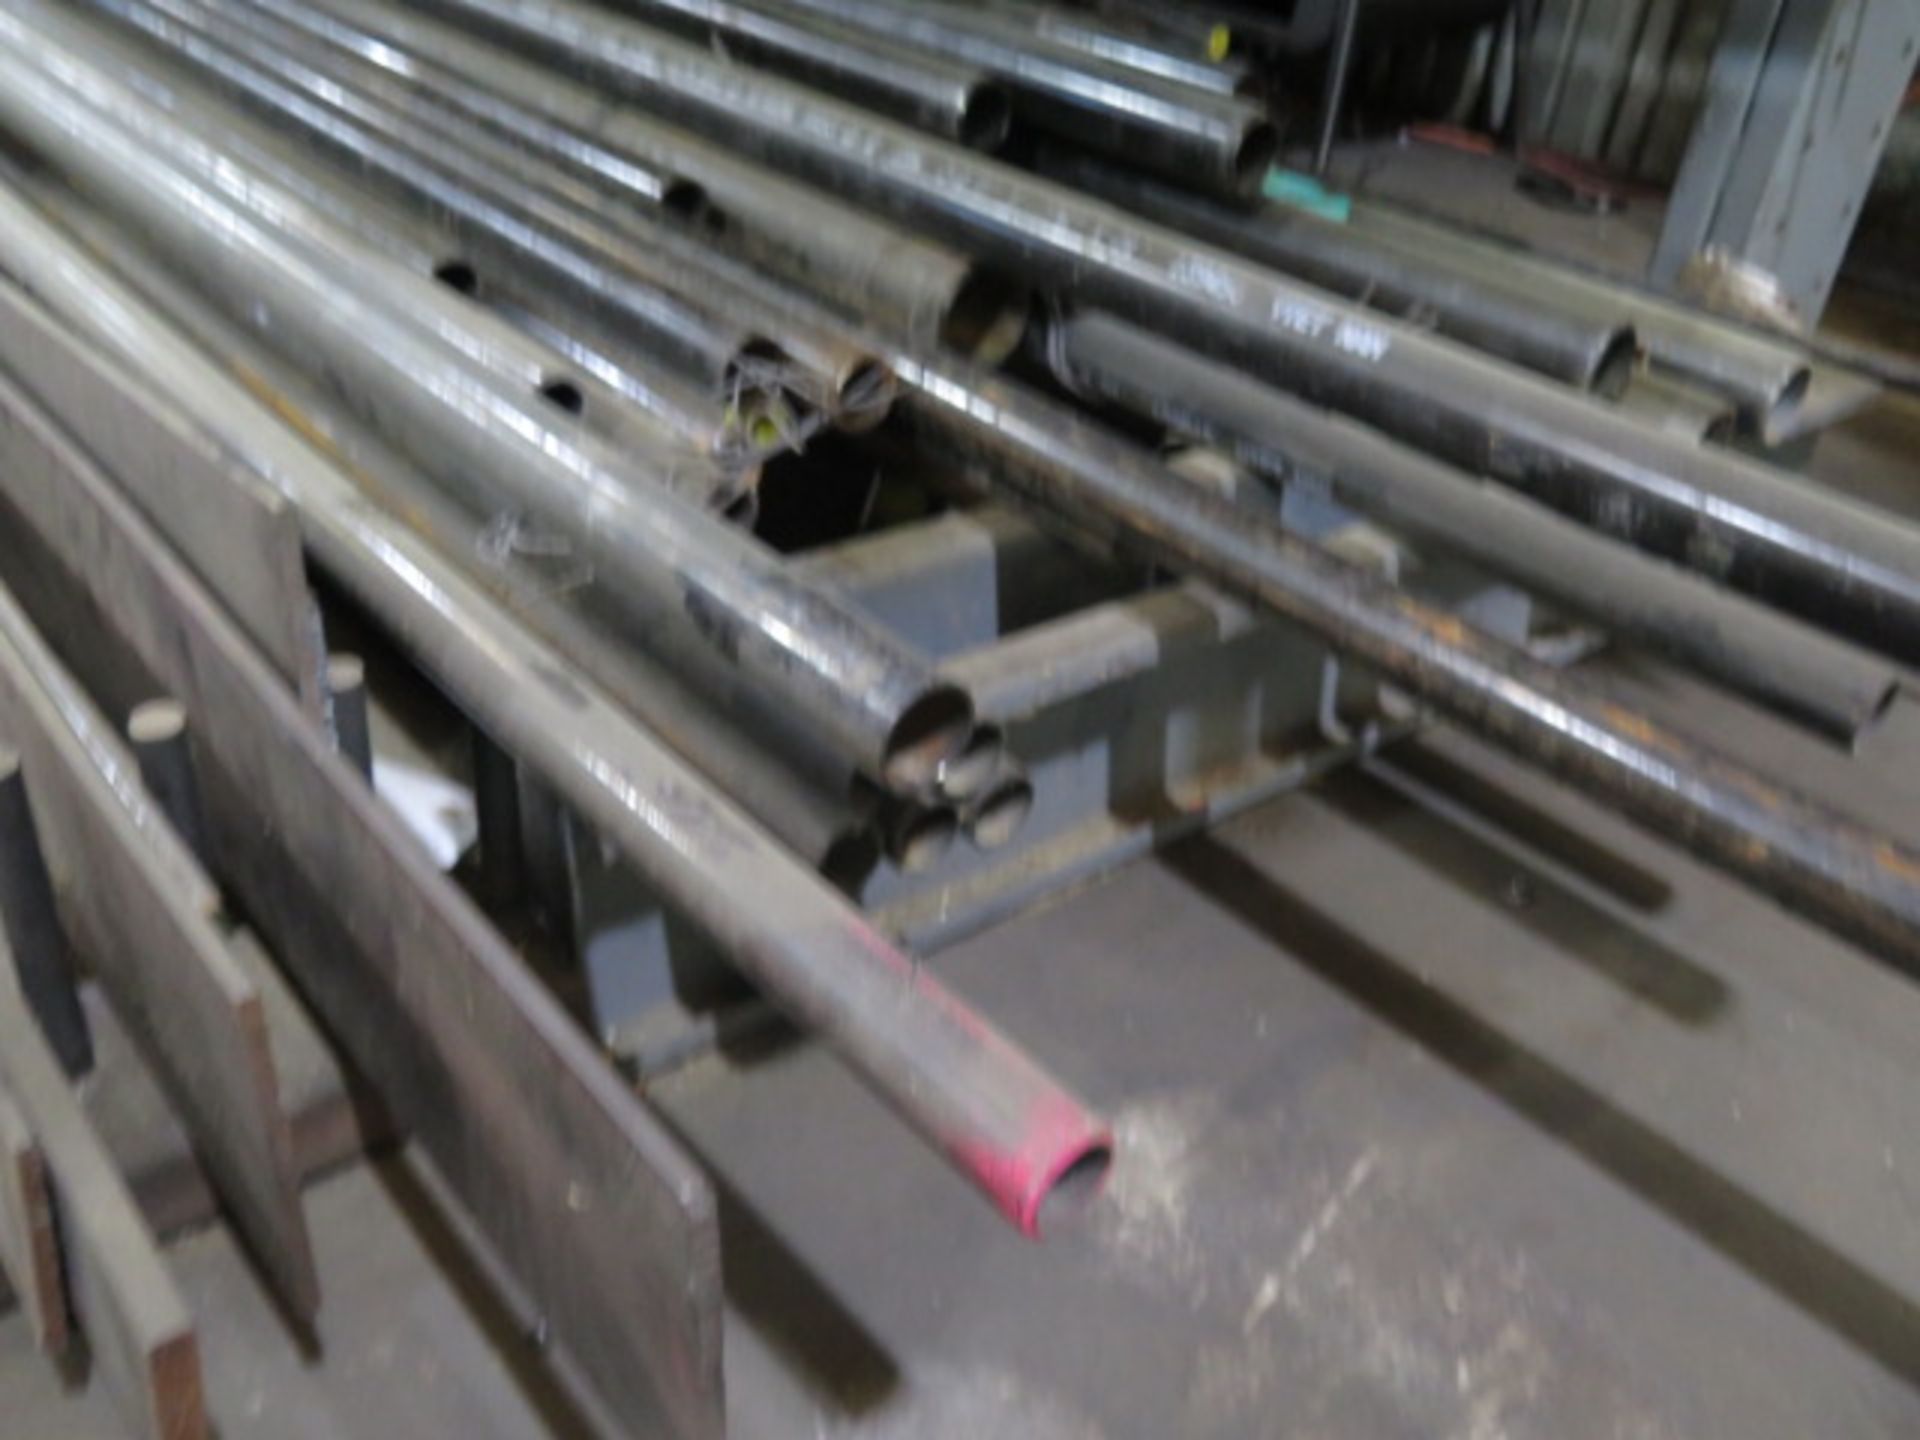 Steel Materials Tubing, Angle Iron, Flat Stock and Challel Stock (SOLD AS-IS - NO WARRANTY) - Image 3 of 11